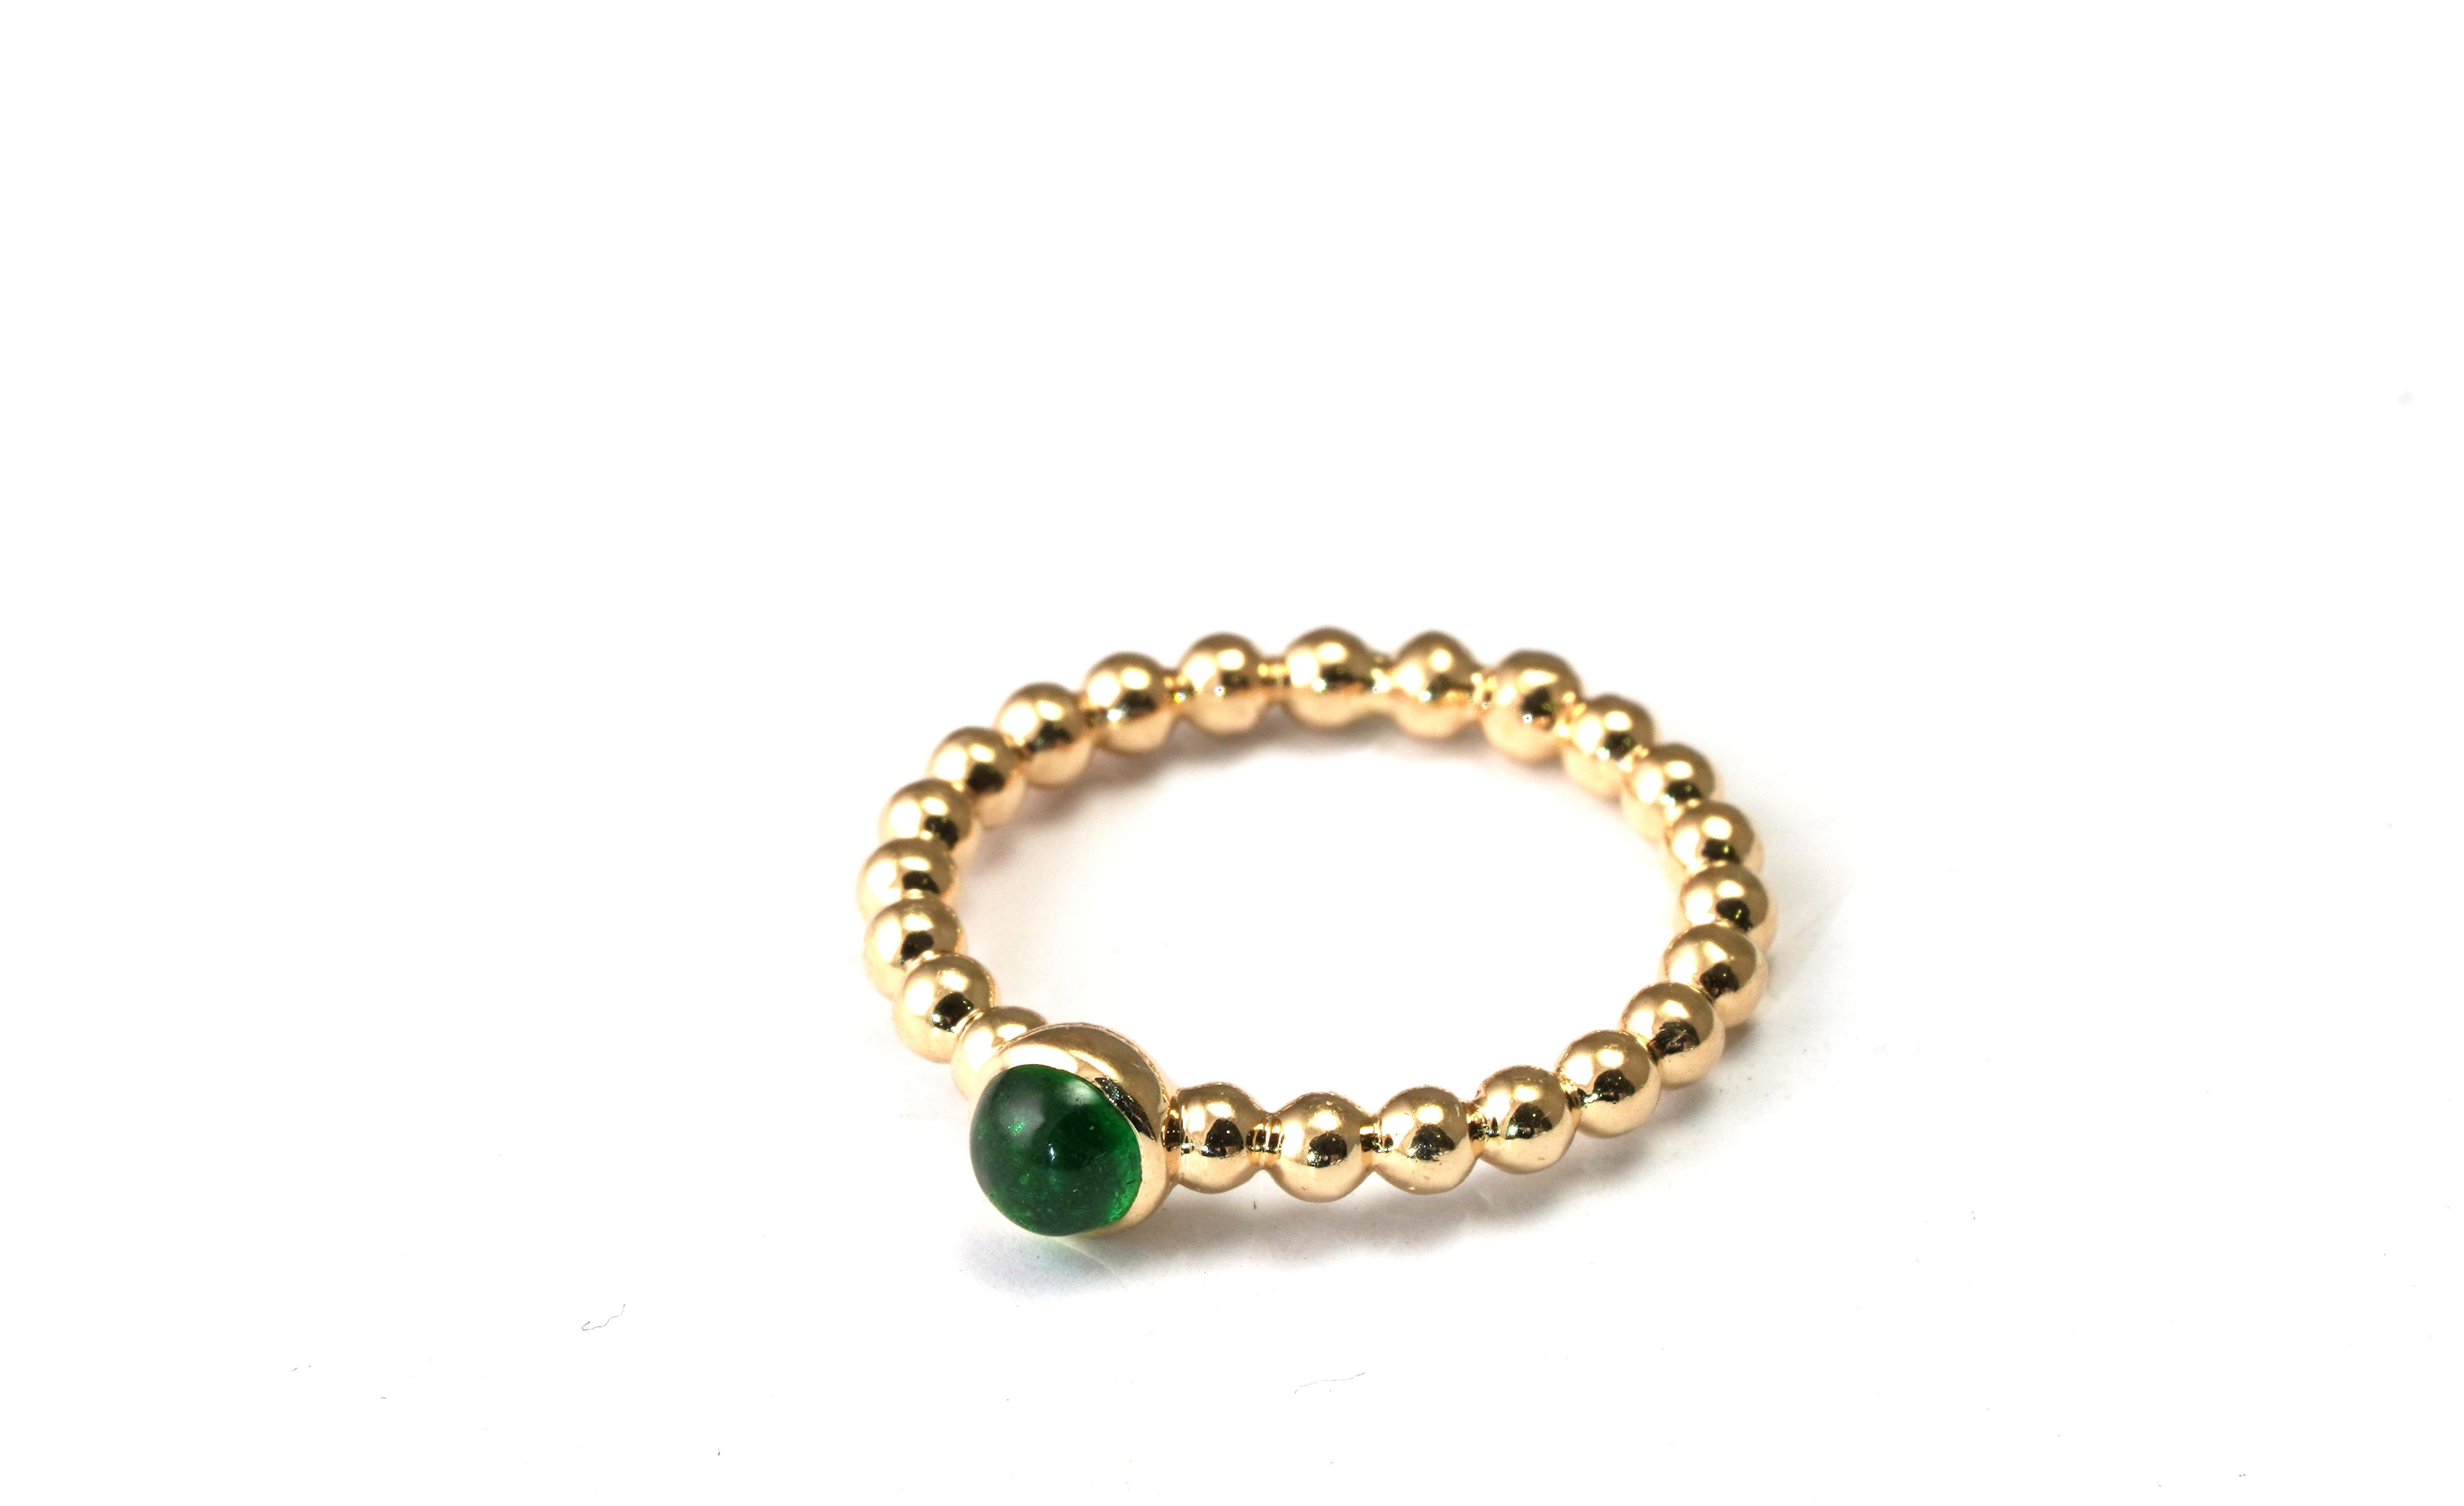 14 kt Gold Ring with Tsavorite Garnet
Gold Color: Yellow
Ring size: 5.25 US
Total weight: 2.66 grams

Set with:
- Tsavorite Garnet
Cut: Cabochon
Color: Green
Weight: 0.50 Carat